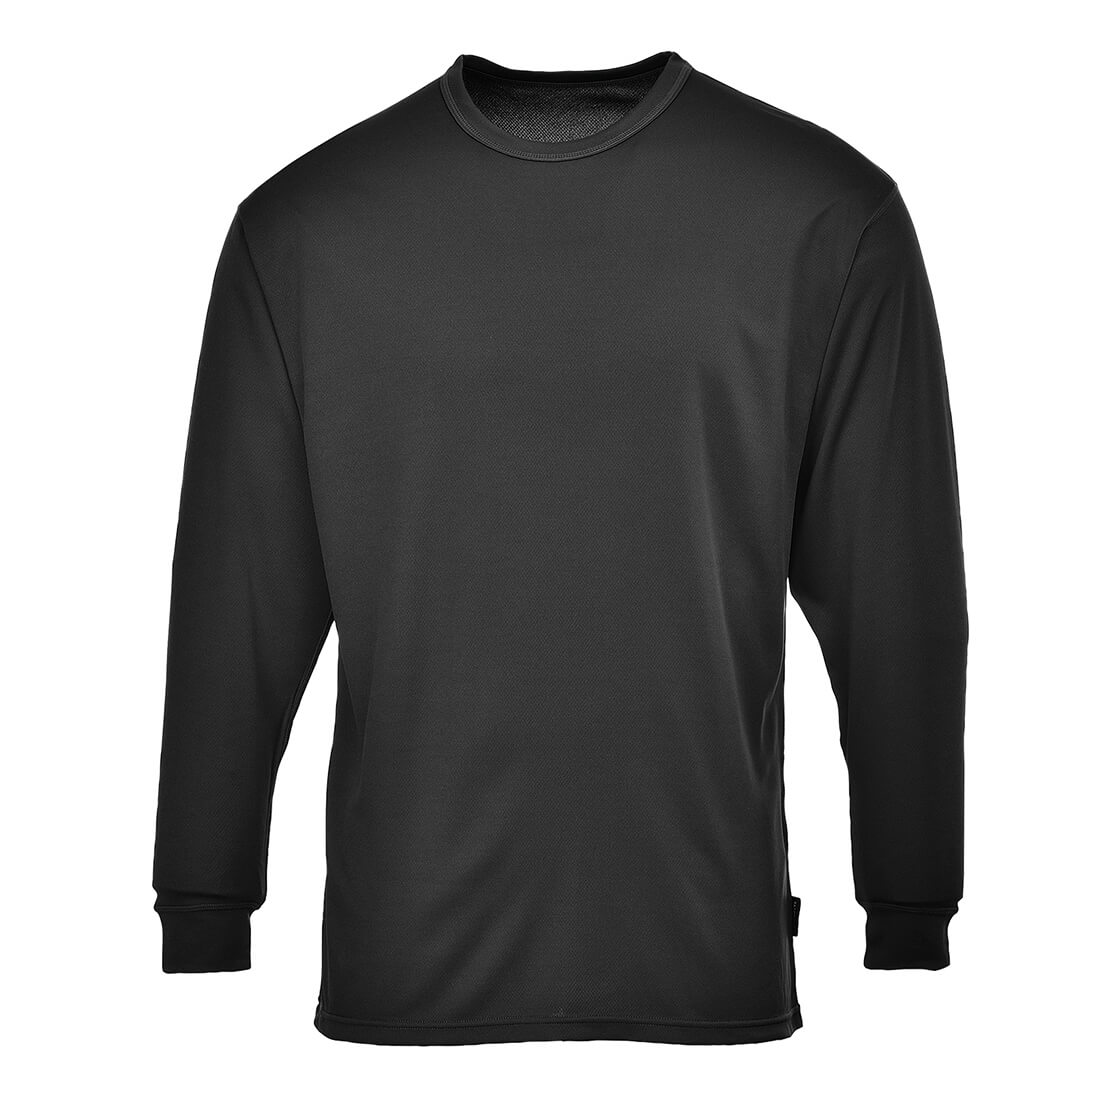 Photo of Base Layer Thermal Top Long Sleeve Black 2xl